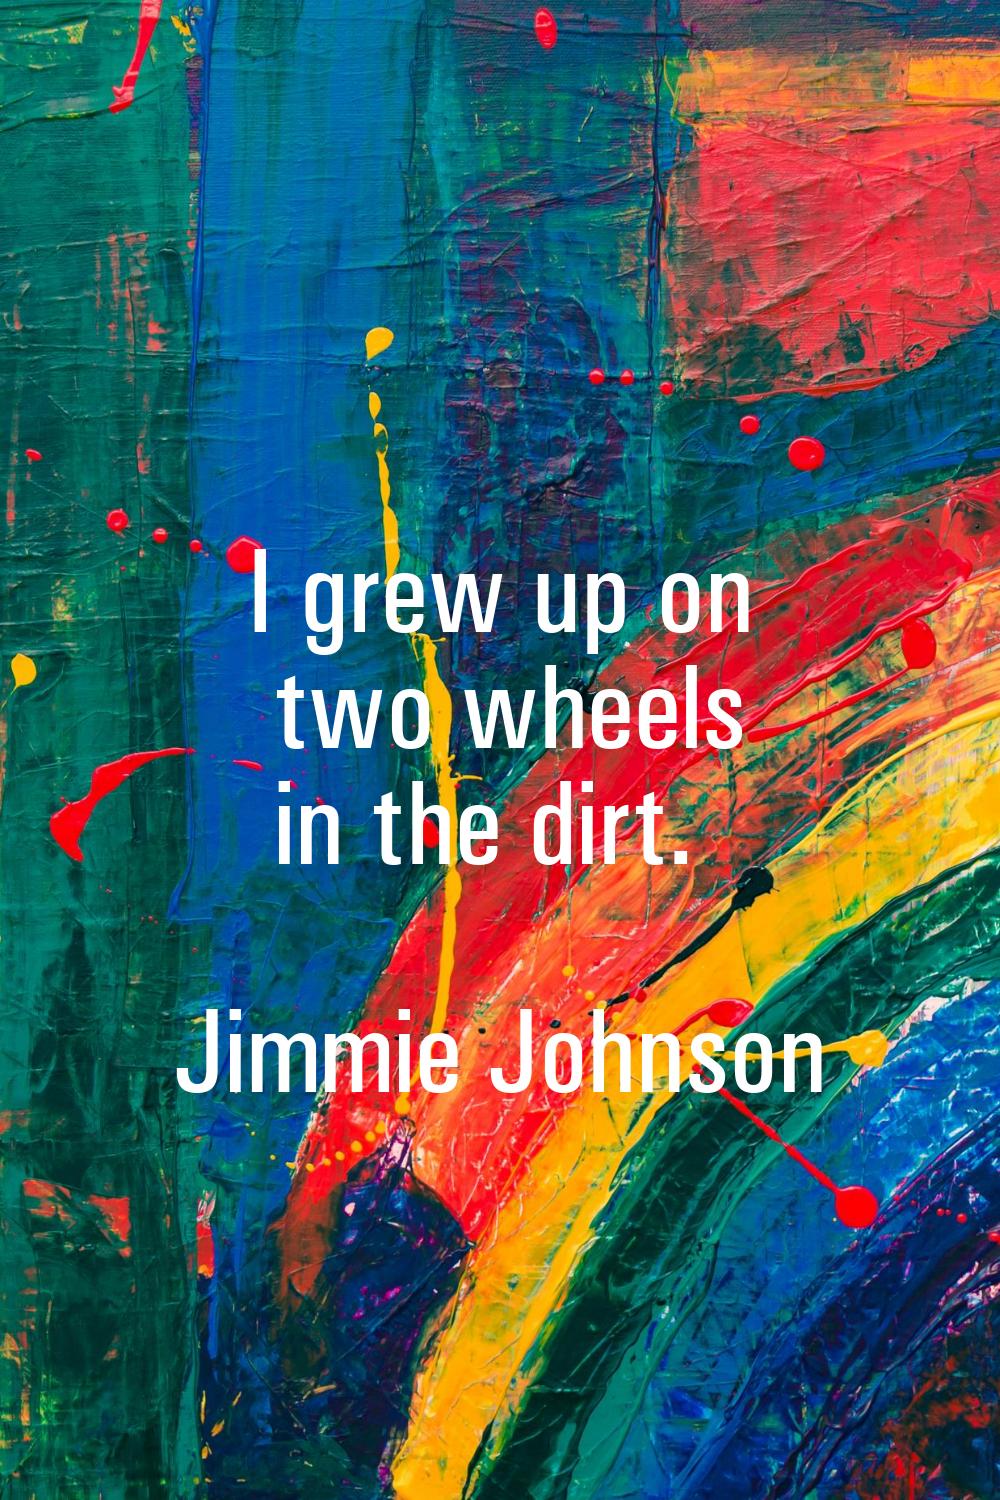 I grew up on two wheels in the dirt.